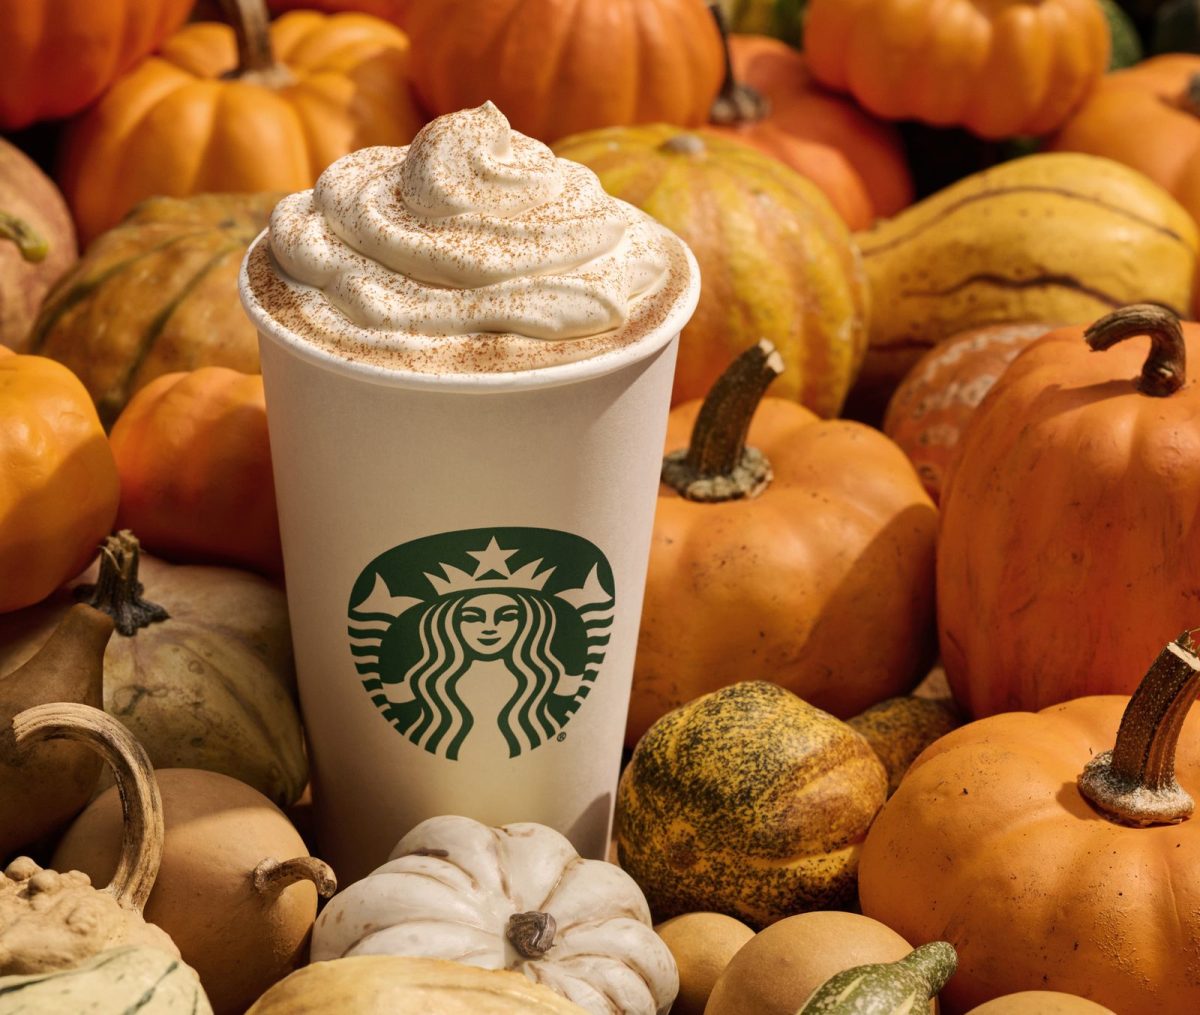 The+Starbucks+fall+menu+is+now+available%2C+but+for+a+limited+time+only.